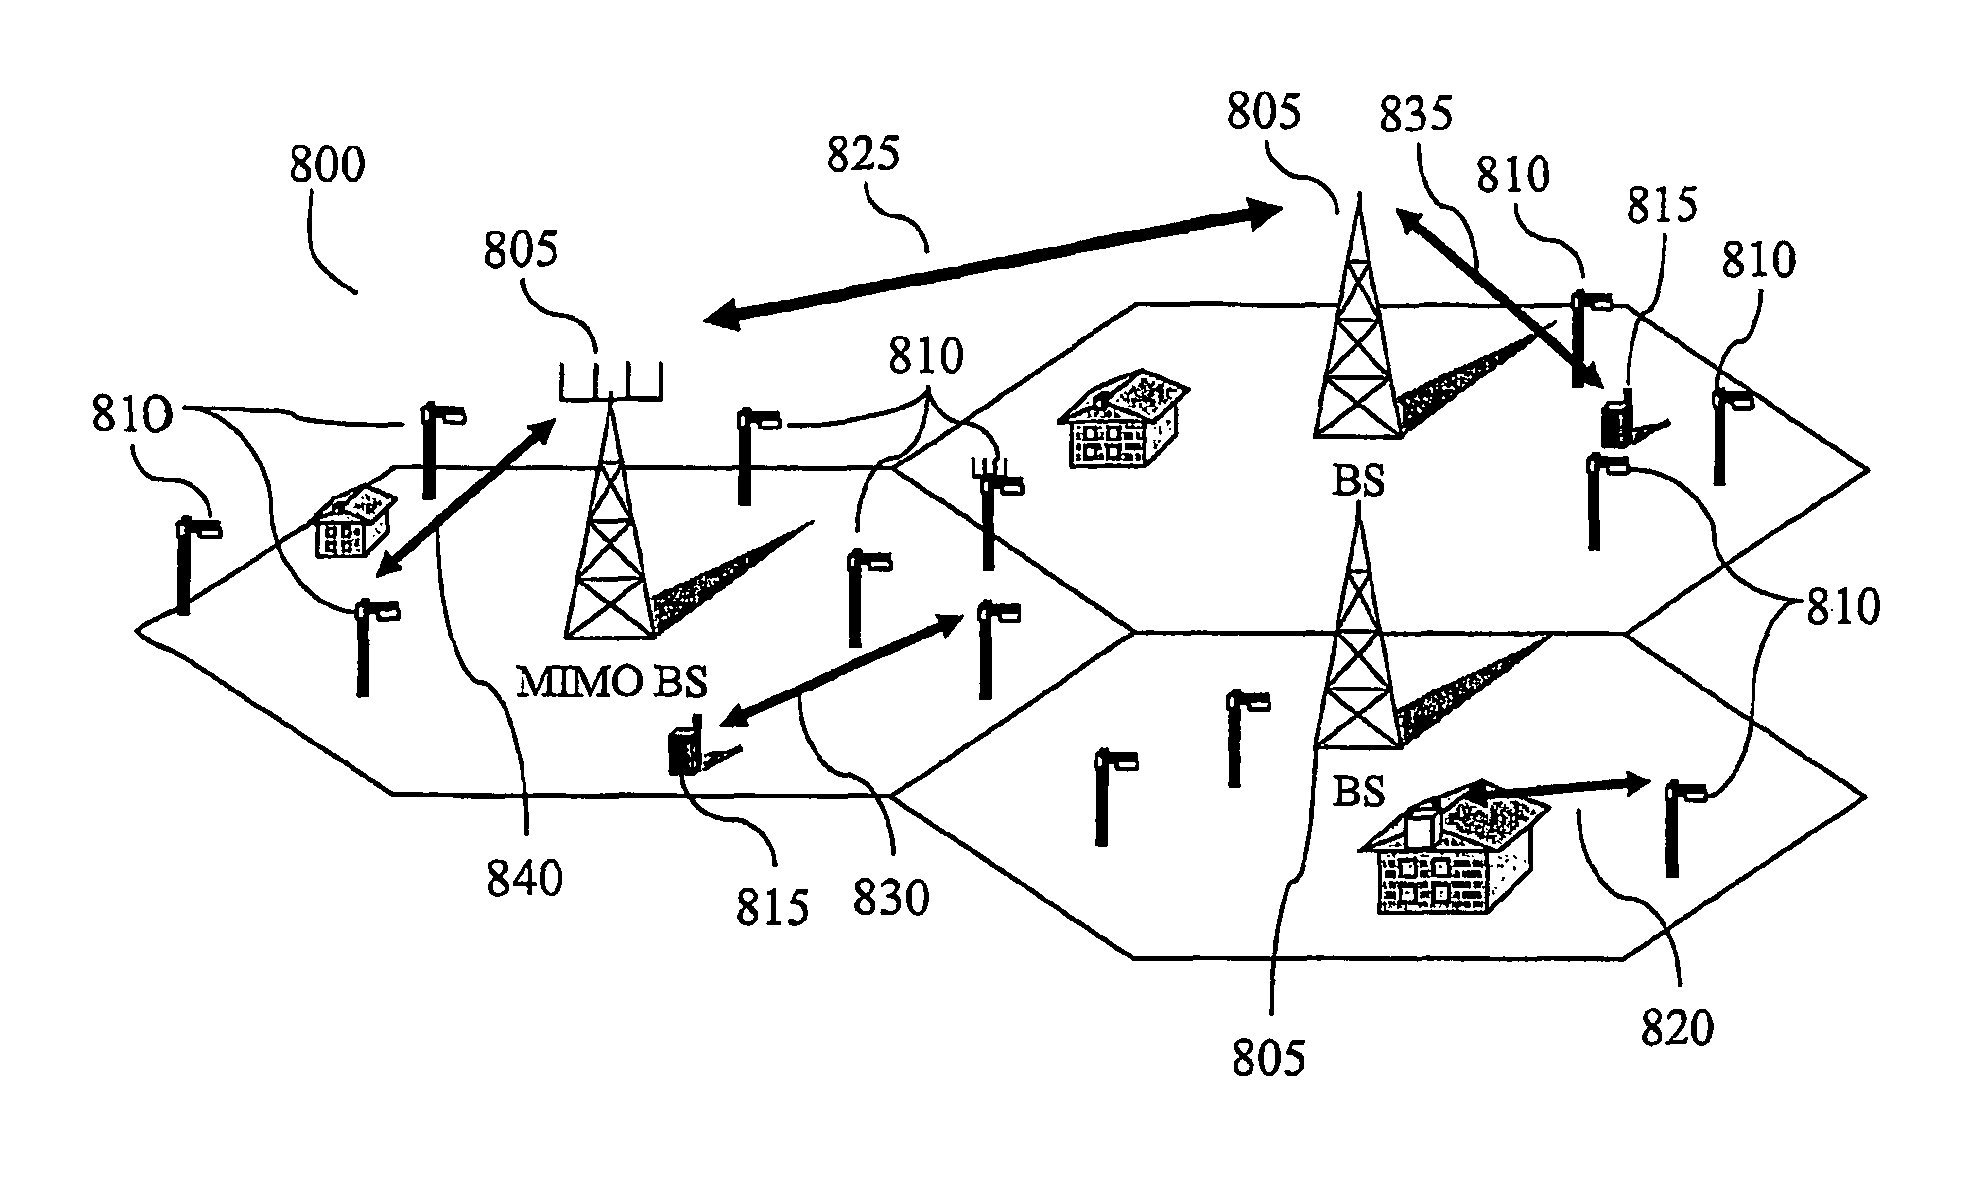 Calibration method to achieve reciprocity of bidirectional communication channels